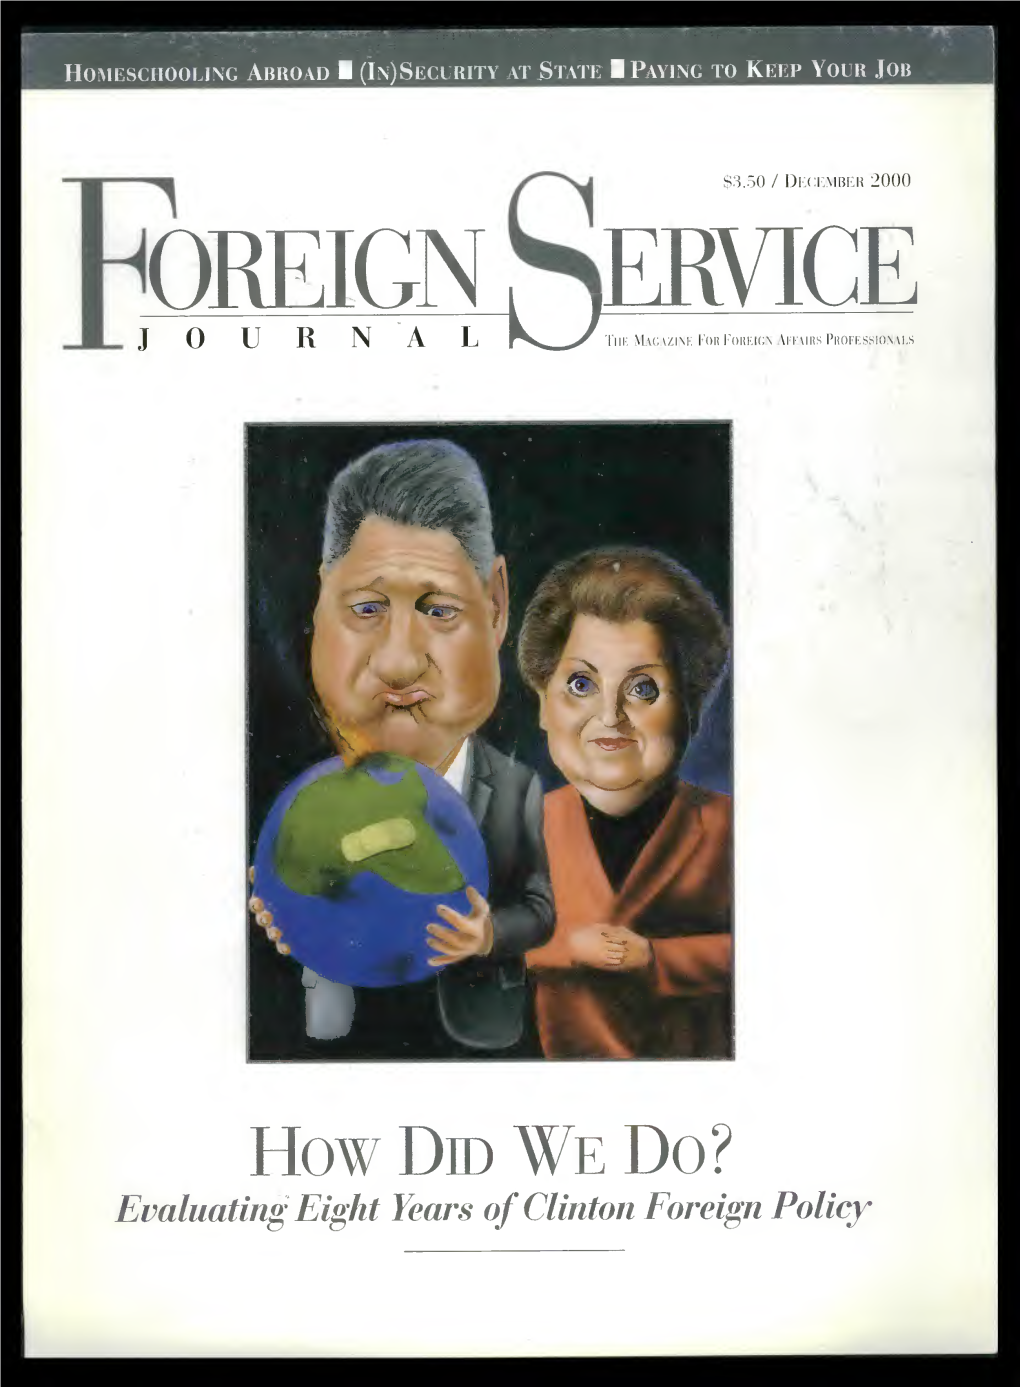 The Foreign Service Journal, December 2000